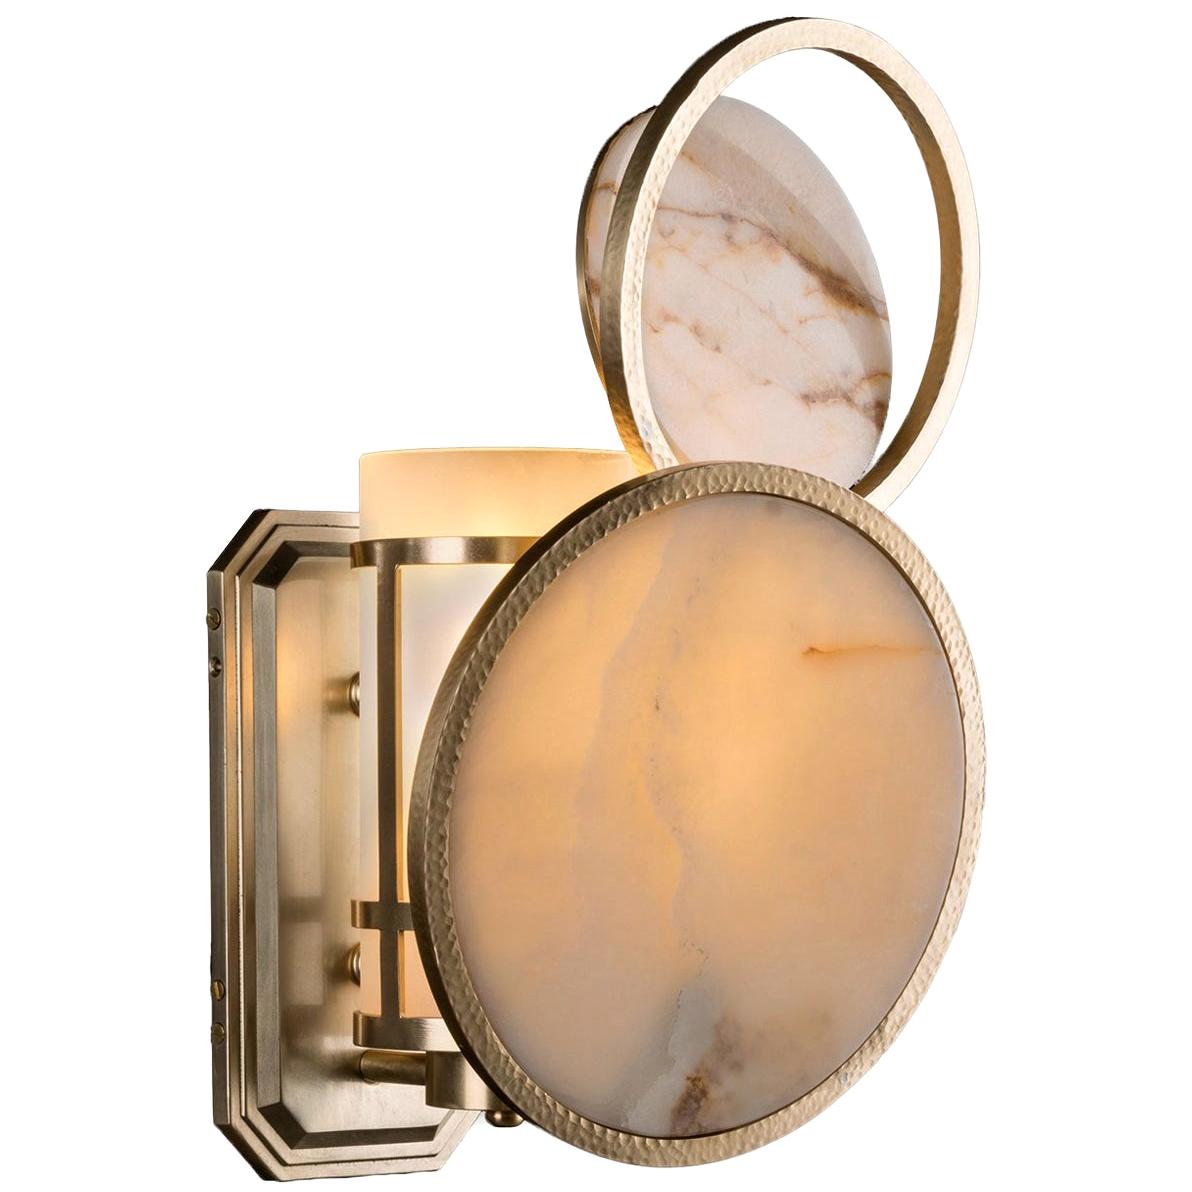 Eclipse Left Wall Sconce by Badari